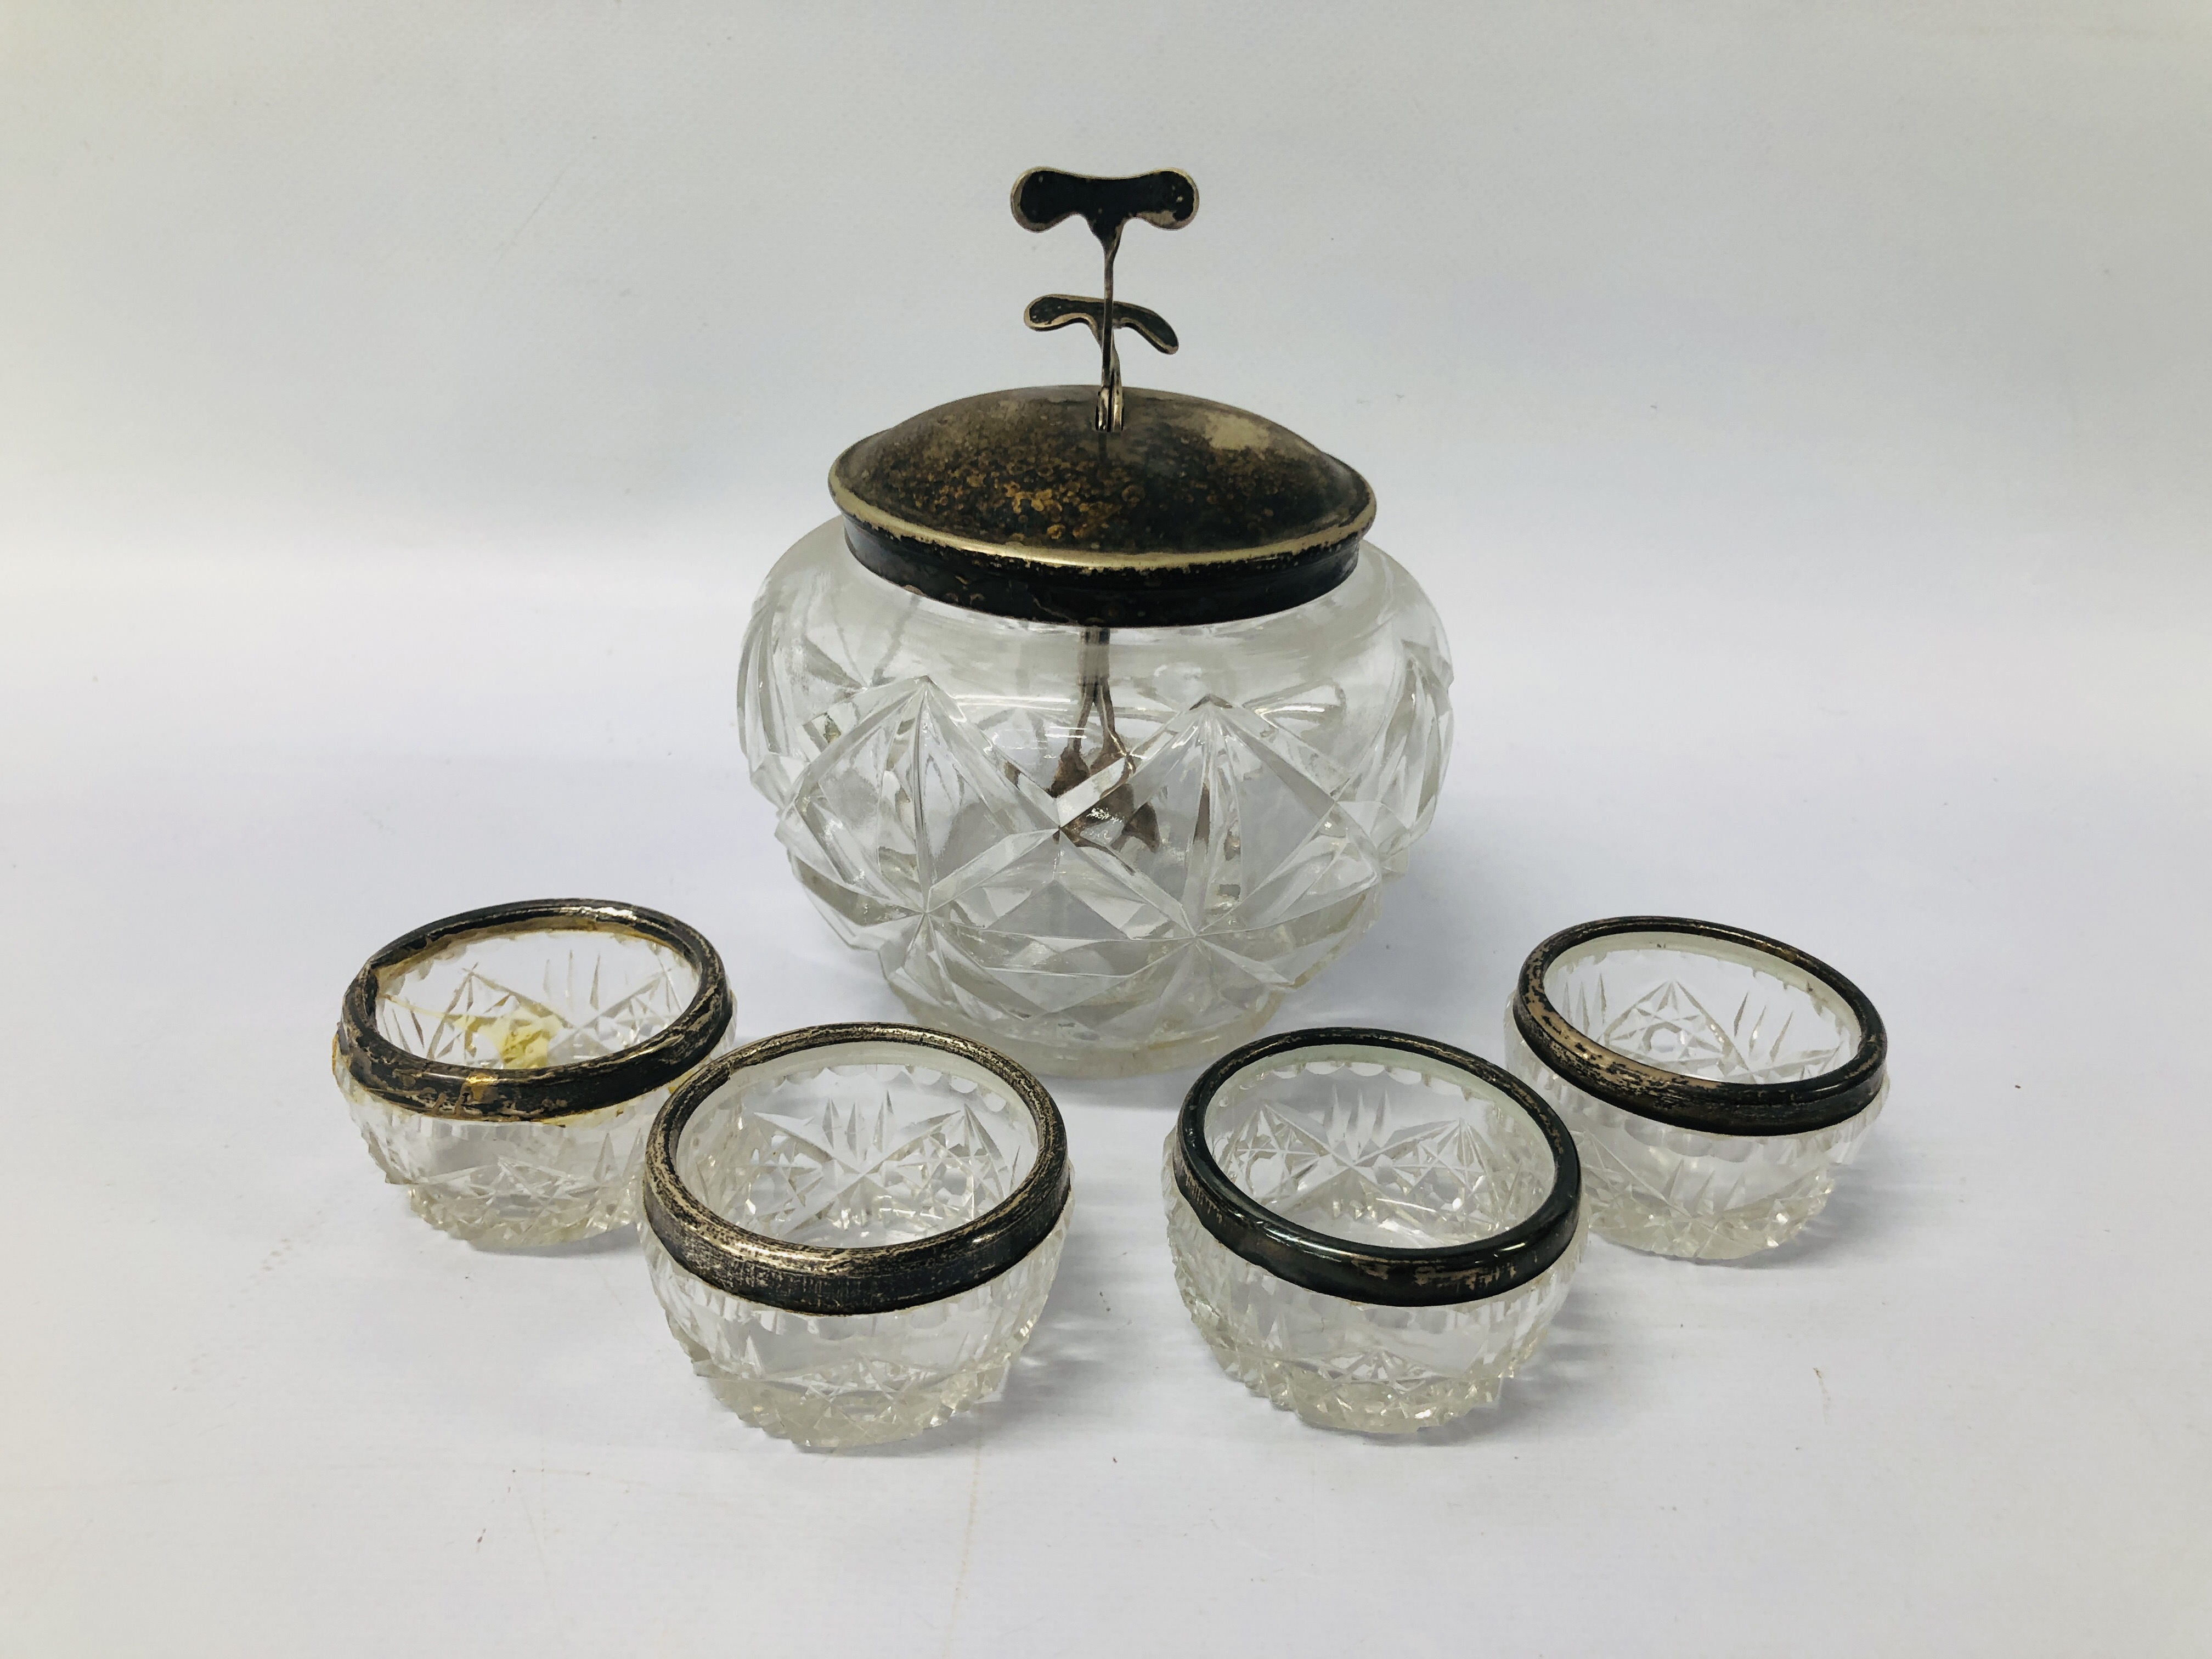 SET OF 4 SILVER CUT GLASS SALTS (1 A/F) ALONG WITH A VINTAGE GLASS SUGAR BOWL WITH BUILT IN PLATED